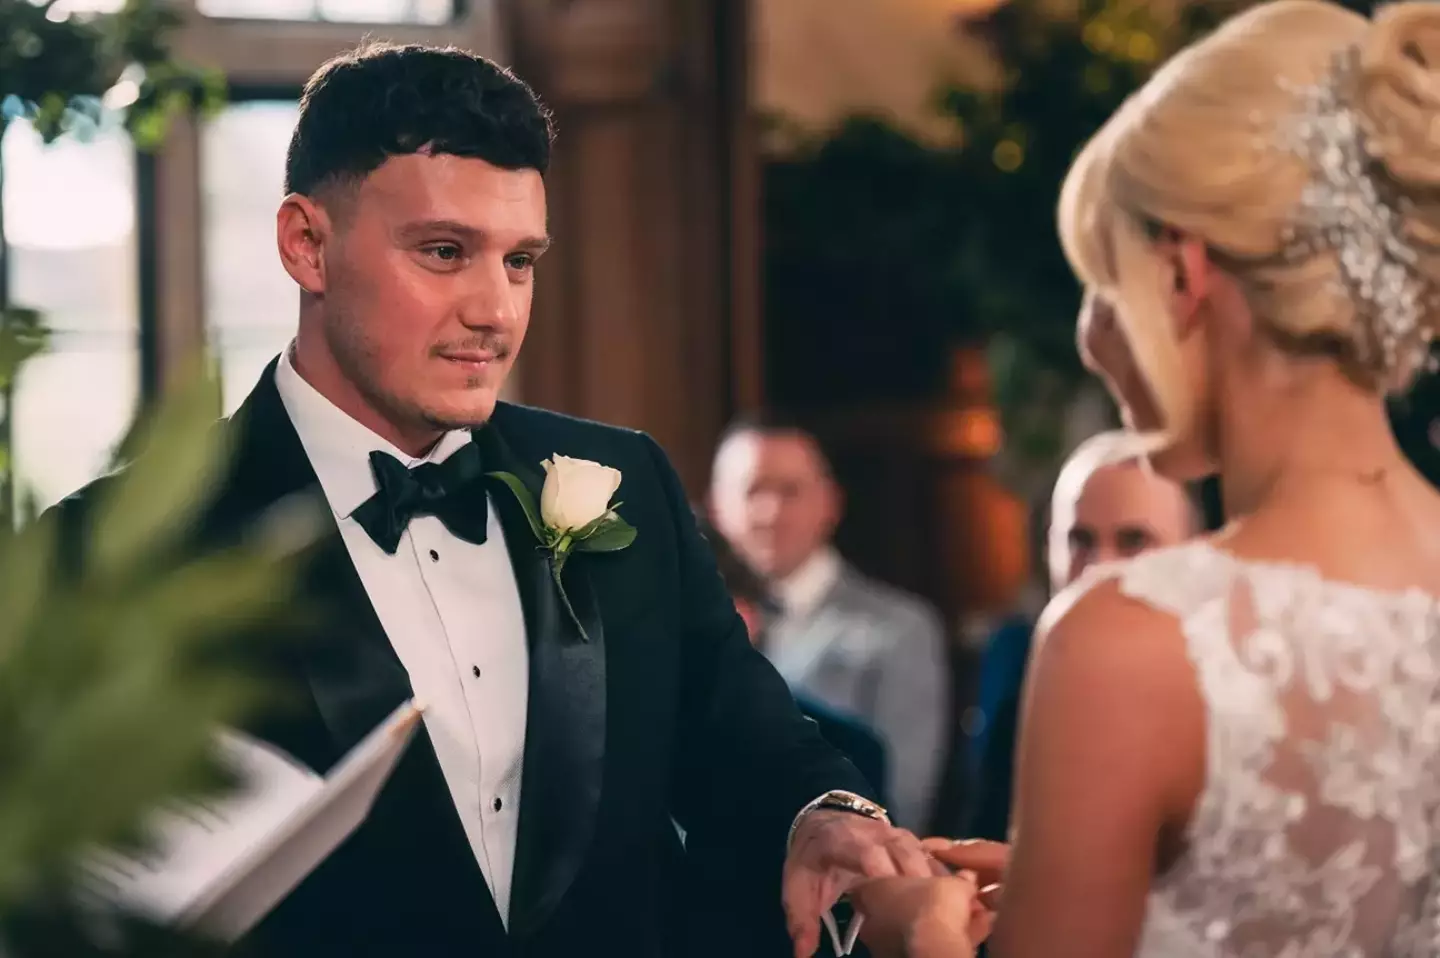 JJ Slater appeared on Married at First Sight UK earlier this year.